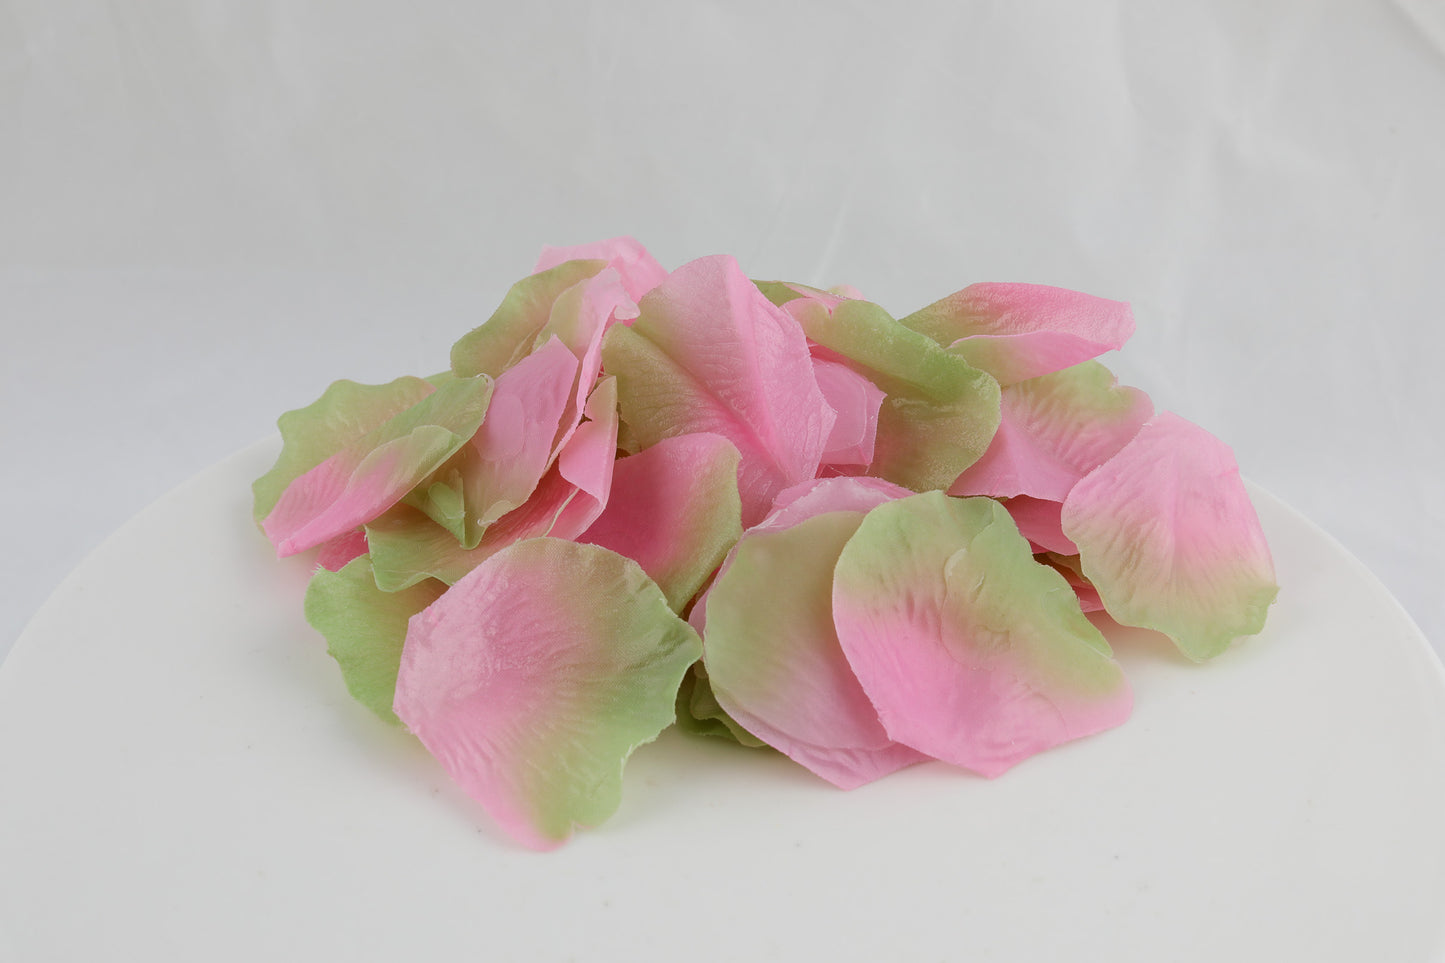 soap shaped as flower petals in pink with green edges